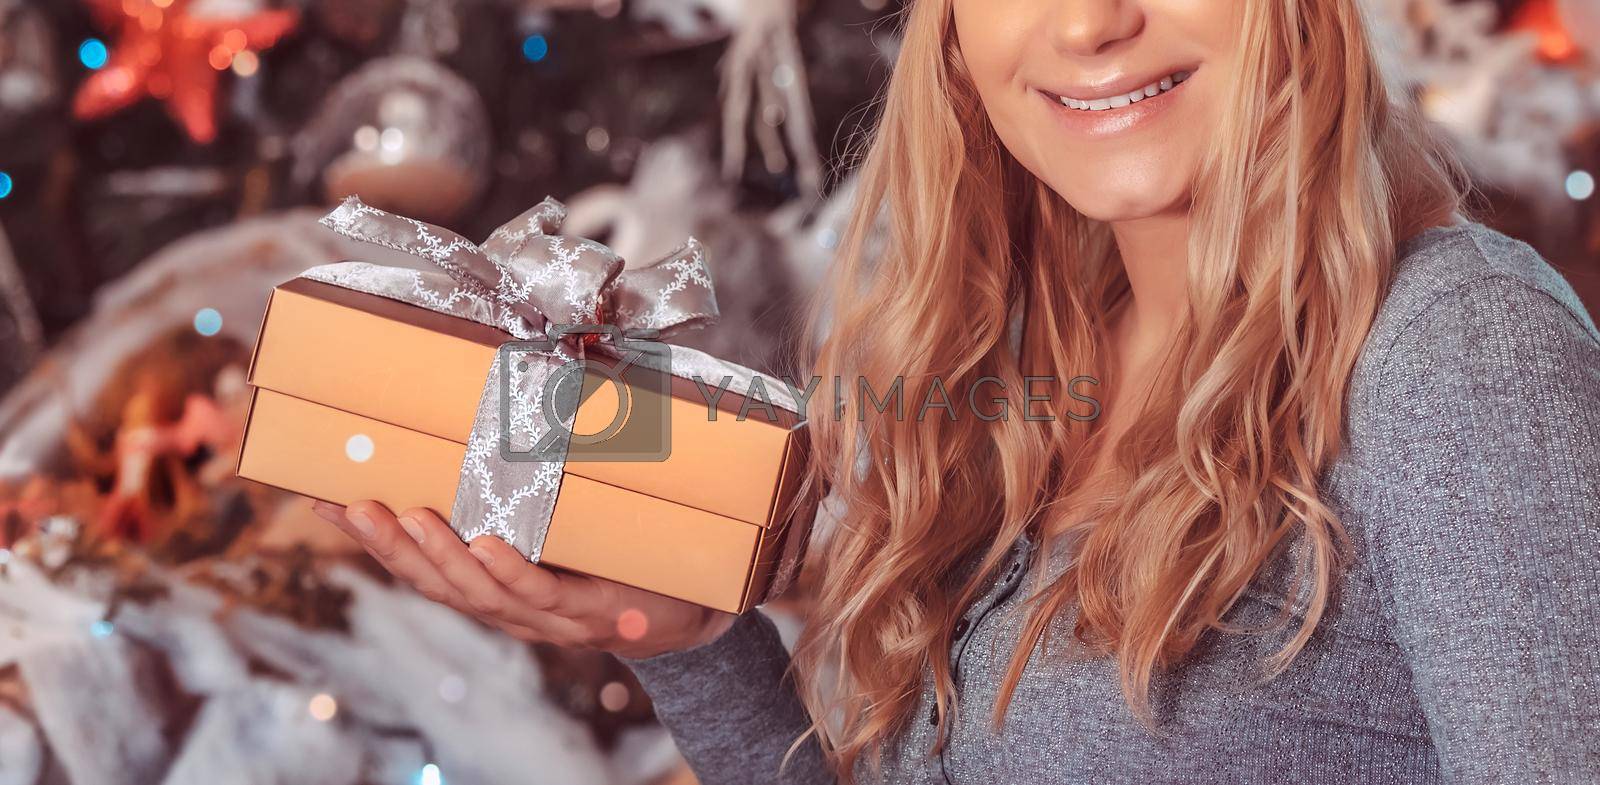 Royalty free image of New Year's Gift Exchange by Anna_Omelchenko